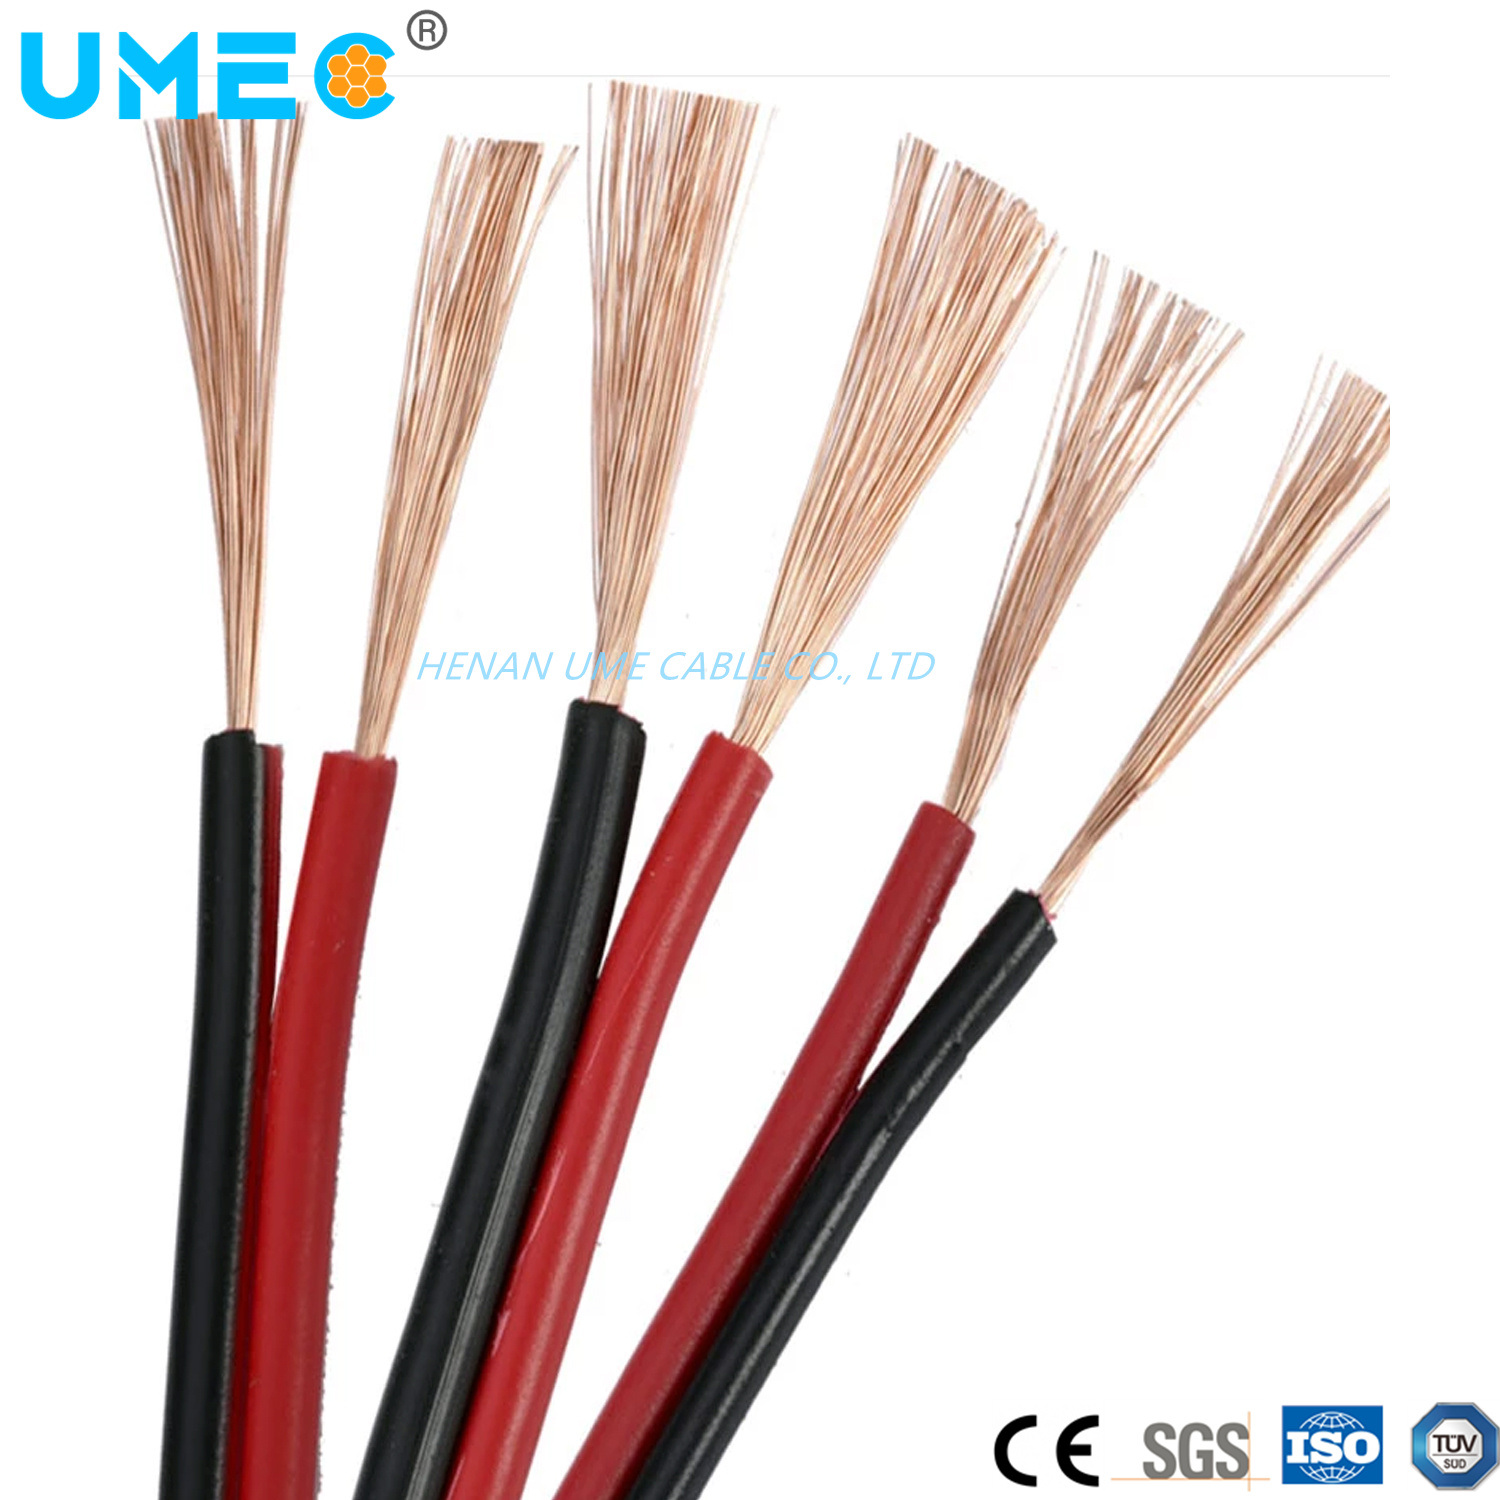 2X18AWG Spt-1 Speaker Cable Electrical Wires